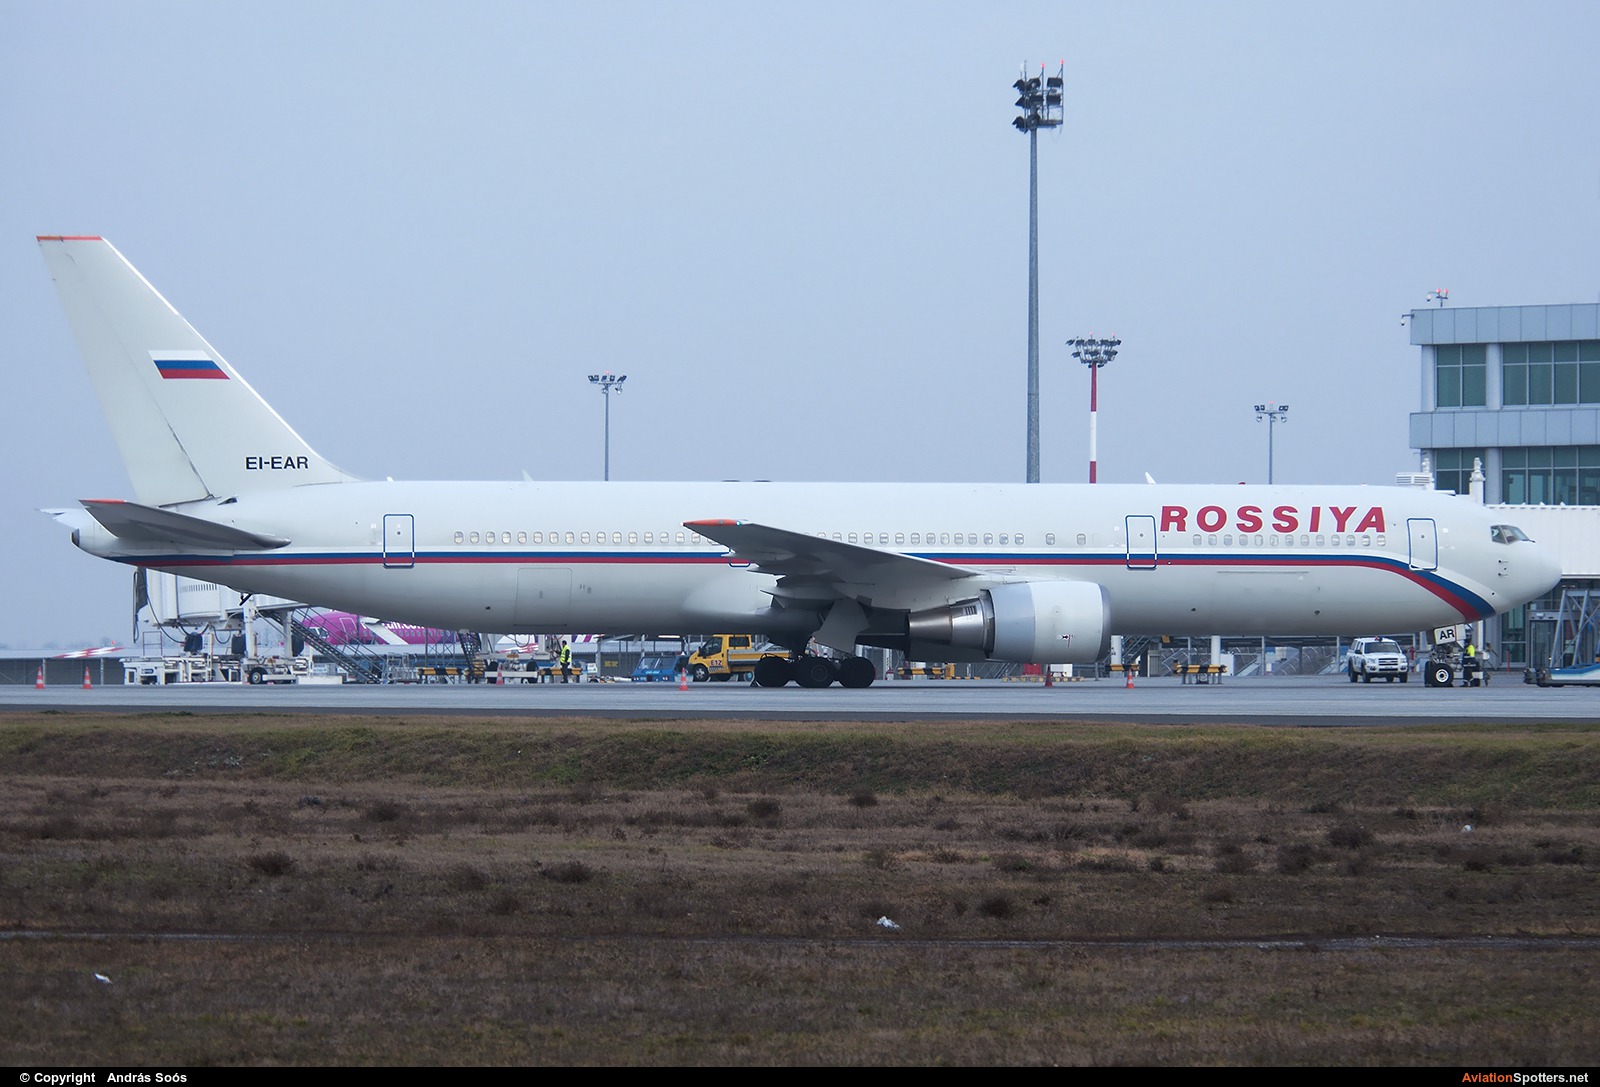 Rossiya Airlines  -  767-300ER  (EI-EAR) By András Soós (sas1965)